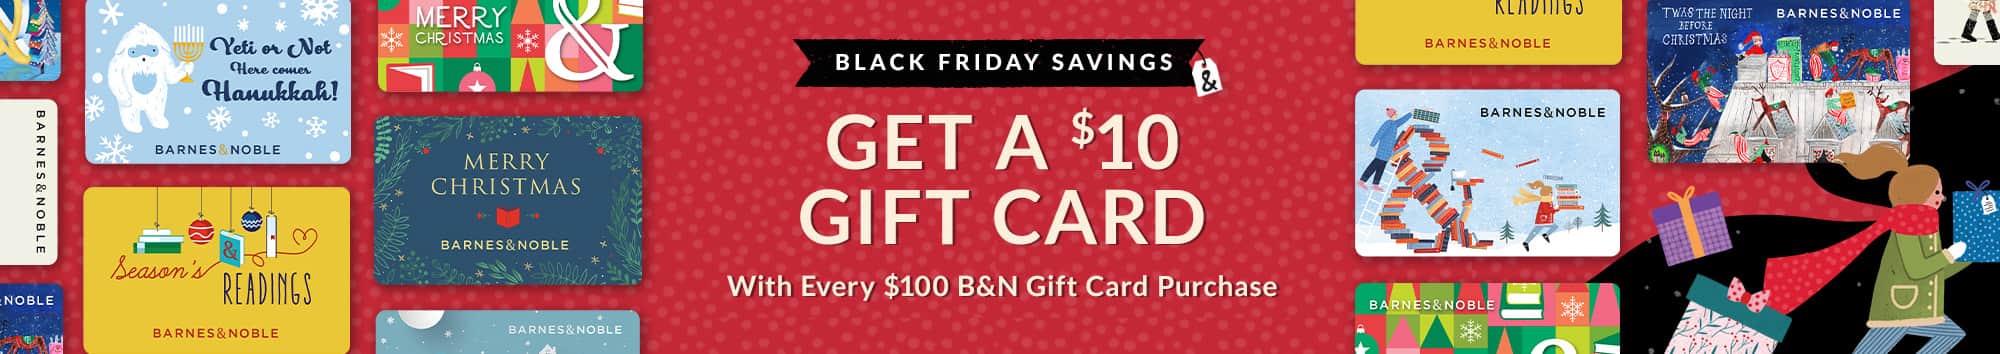 Black Friday Savings - Get10 when you buy 100 worth of Gift cards